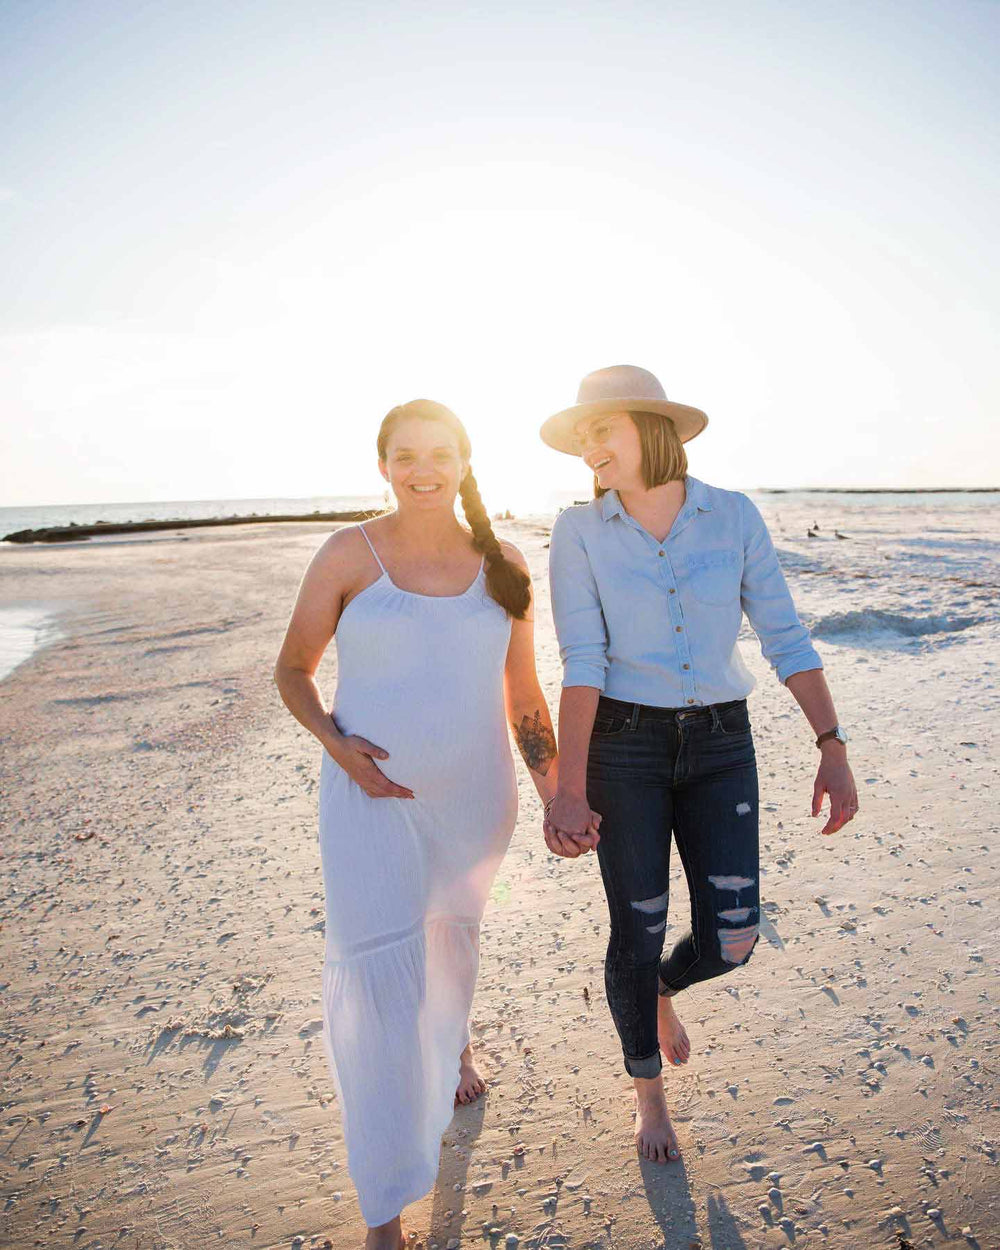 Pregnant woman in white dress holds her wife's hand on the beach.